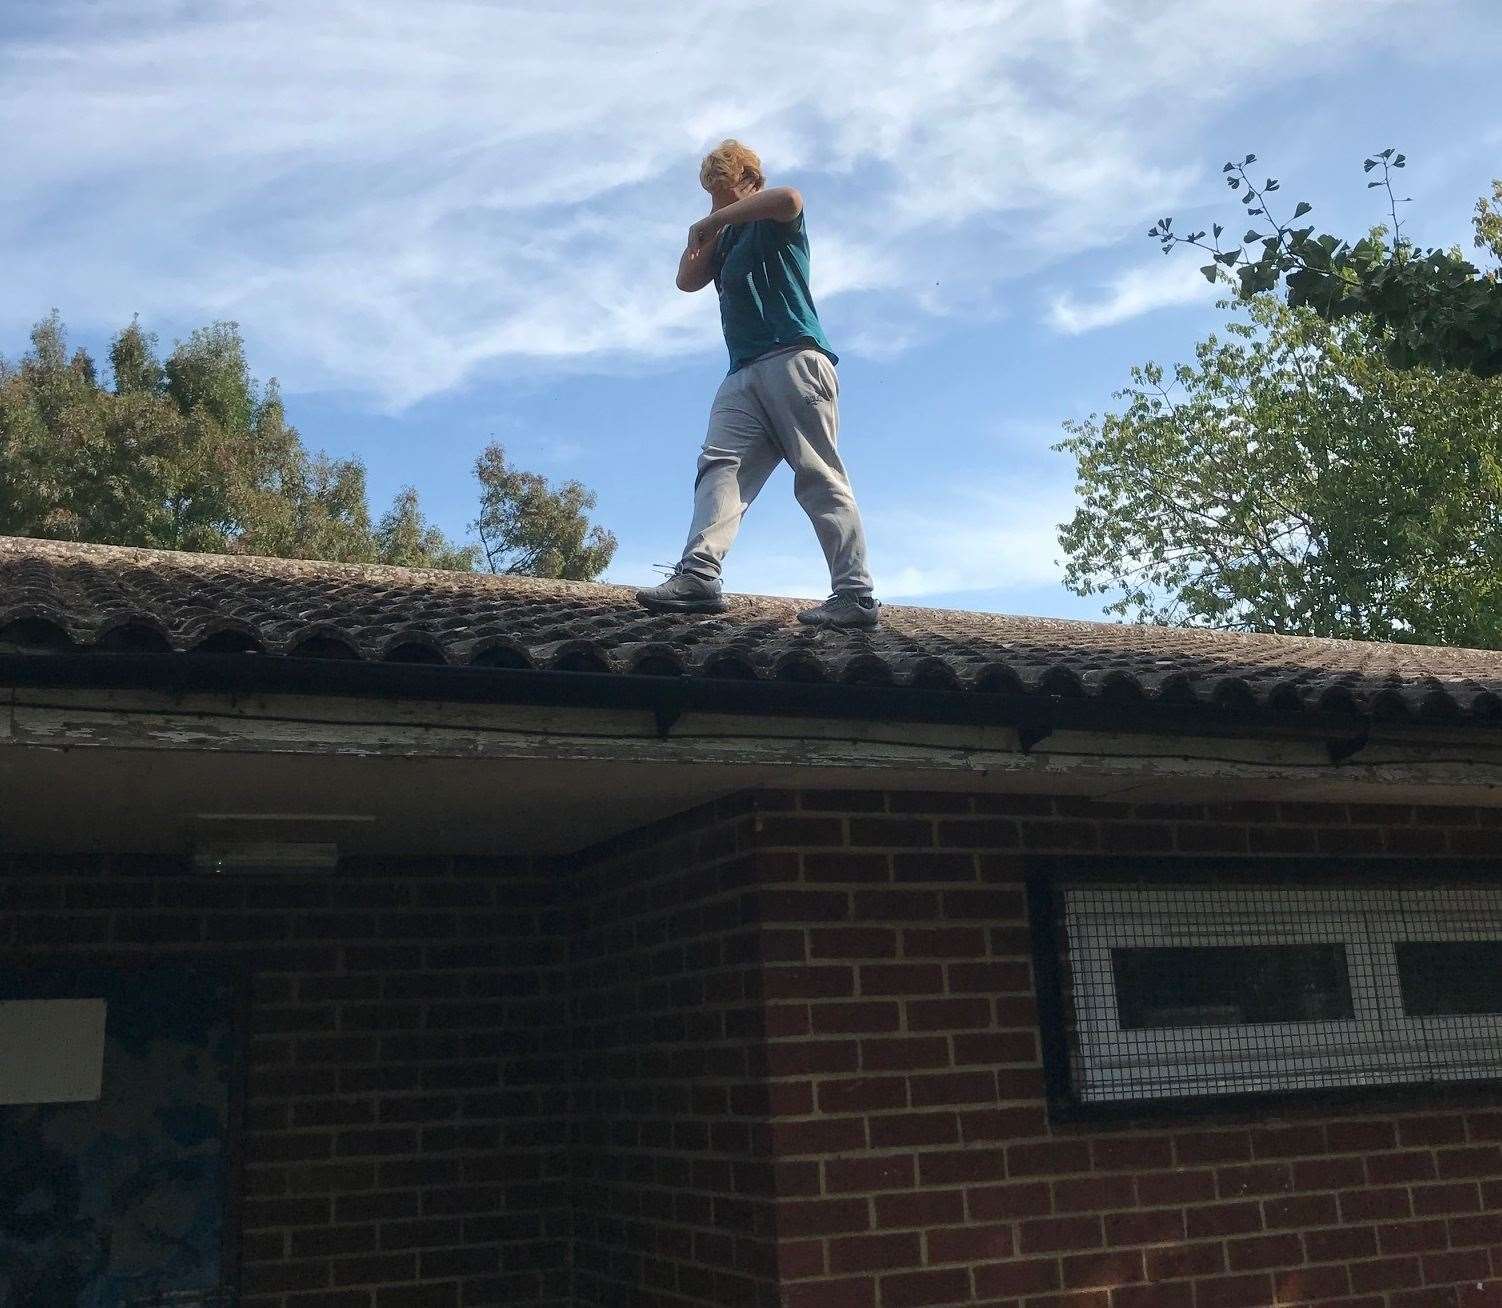 One of the group paraded on the roof during the vandalism